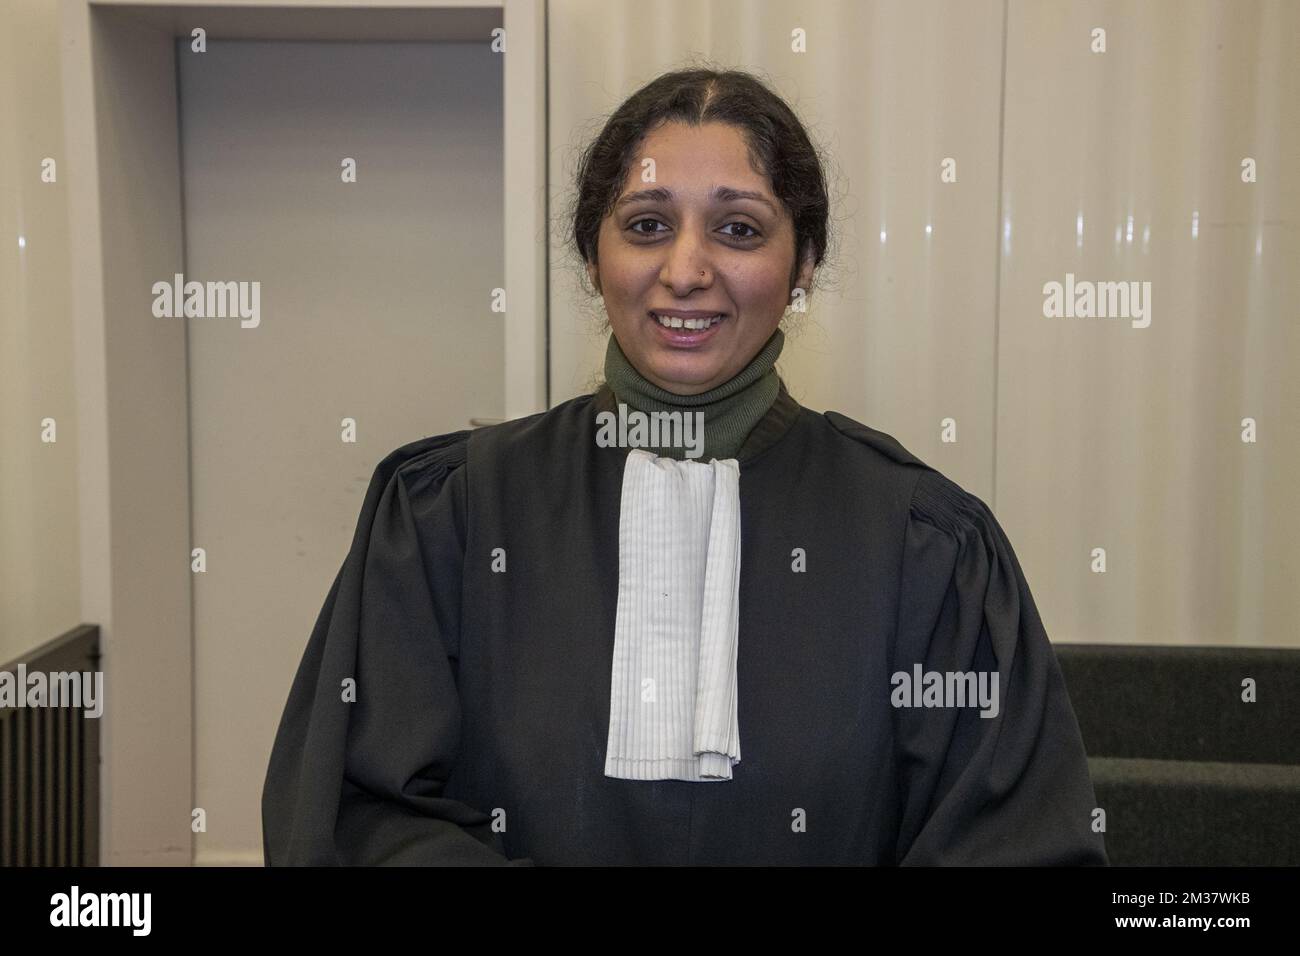 Lawyer Iftara Mohammad pictured during the first day of the assizes trial of Pierre Cornette (63), a former major in the Belgian army, before the Assizes Court of East-Flanders in Gent on Friday 21 January 2022. Cornette is accused of torture, assault and battery of partner J.W. (71). BELGA PHOTO NICOLAS MAETERLINCK Stock Photo